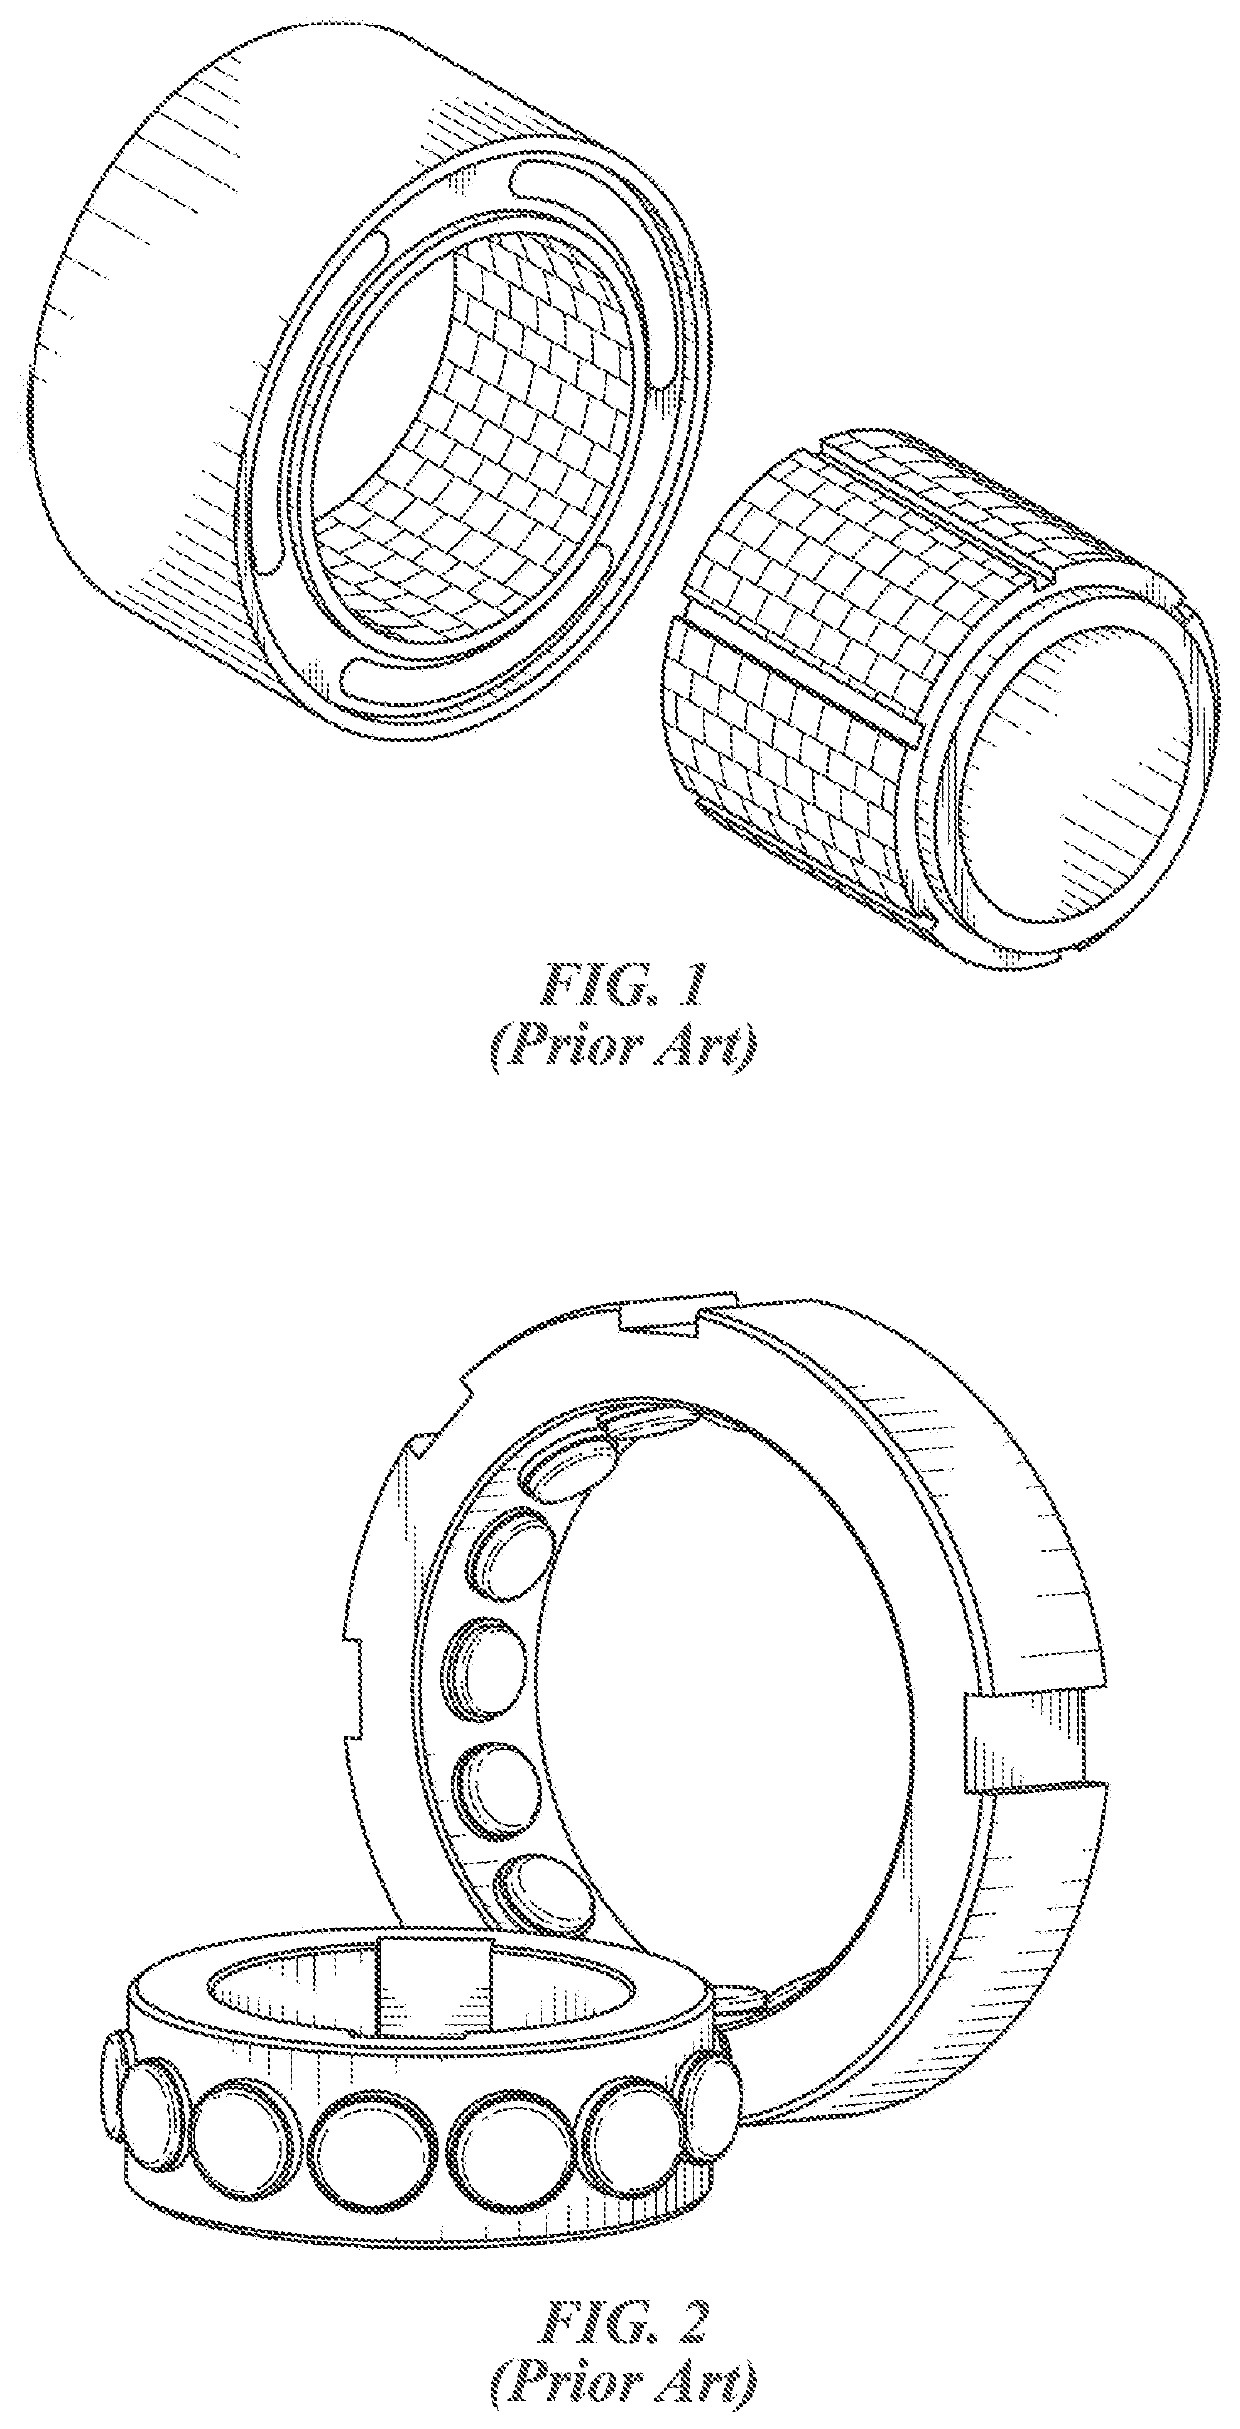 Compliant Bearing for Oilfield Applications